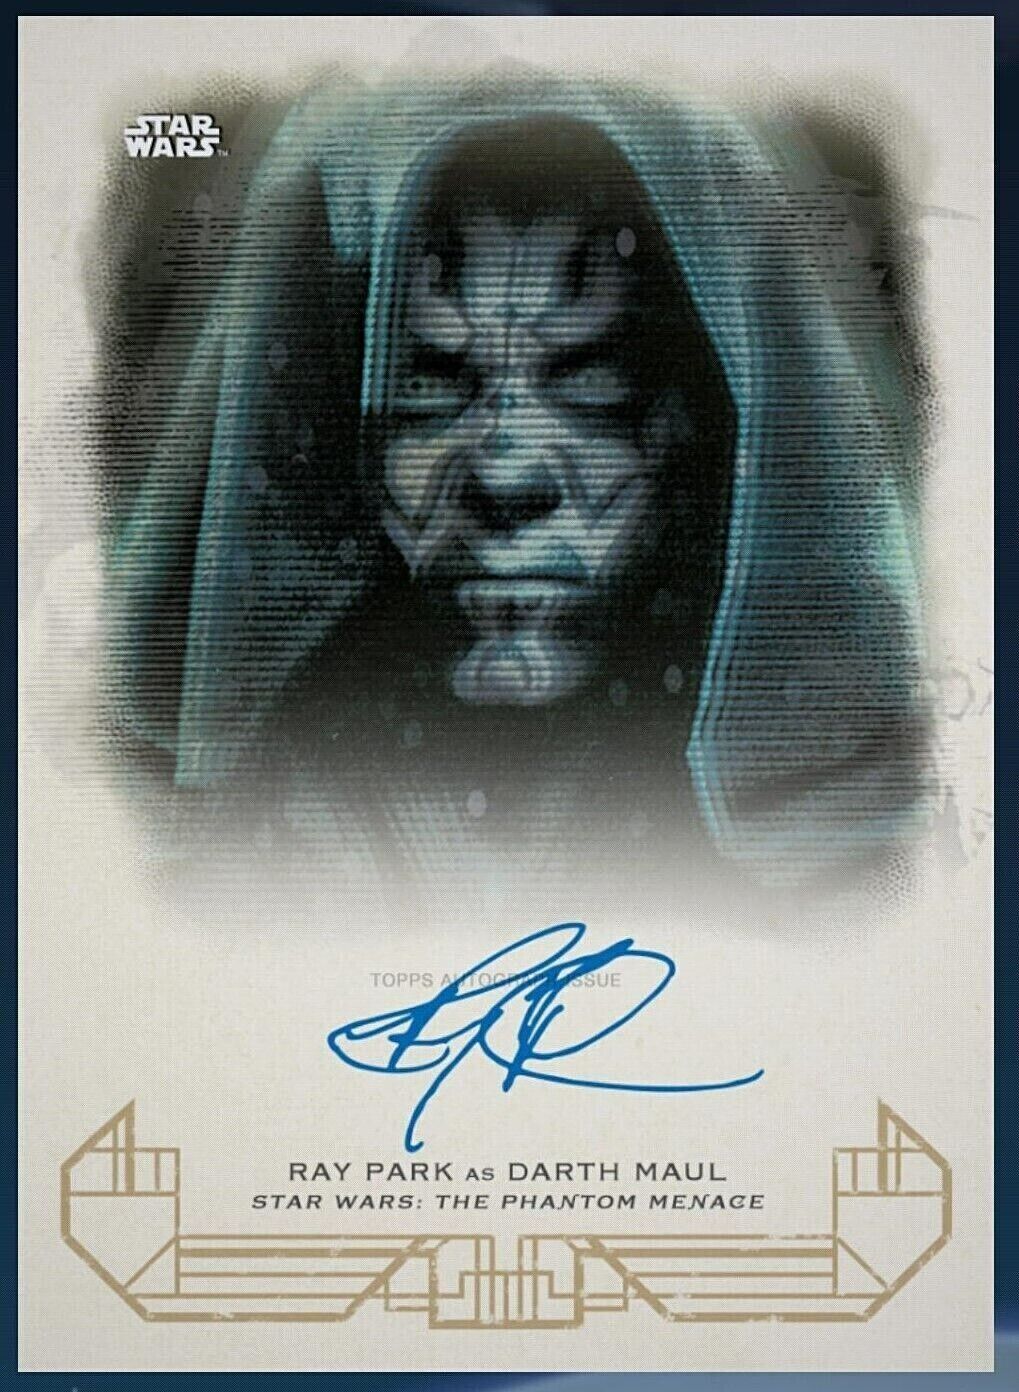 Topps Star Wars Heritage RAY PARK Authentic Auto as DARTH MAUL SIG Digital Card